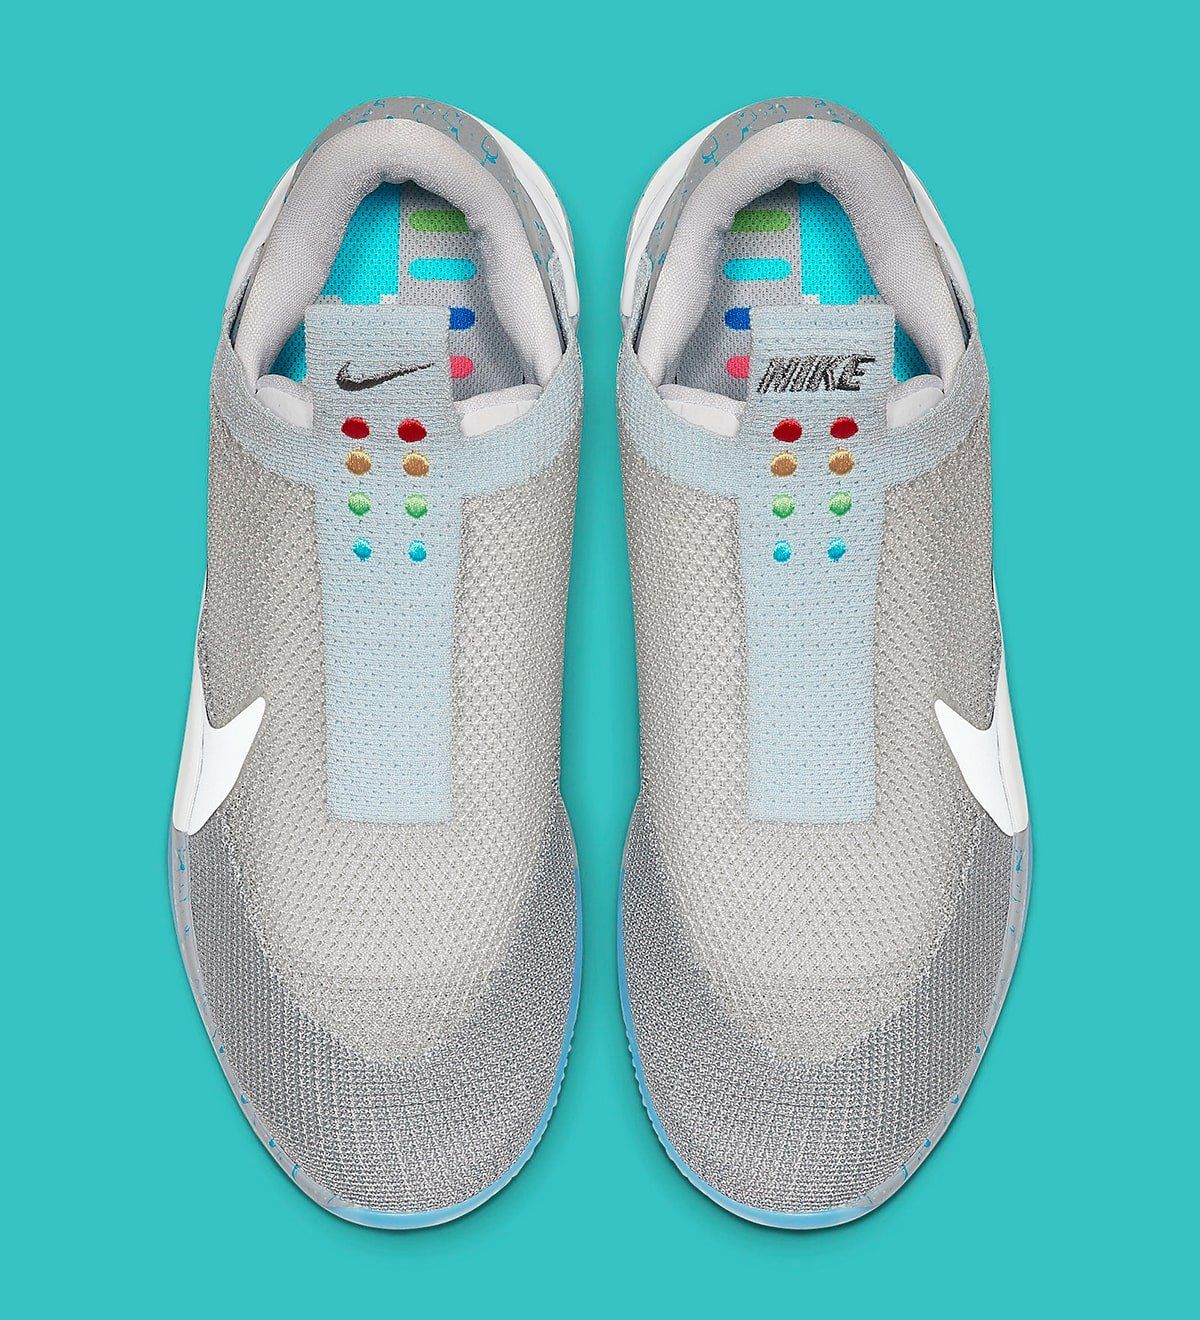 nike air mags release date 2019